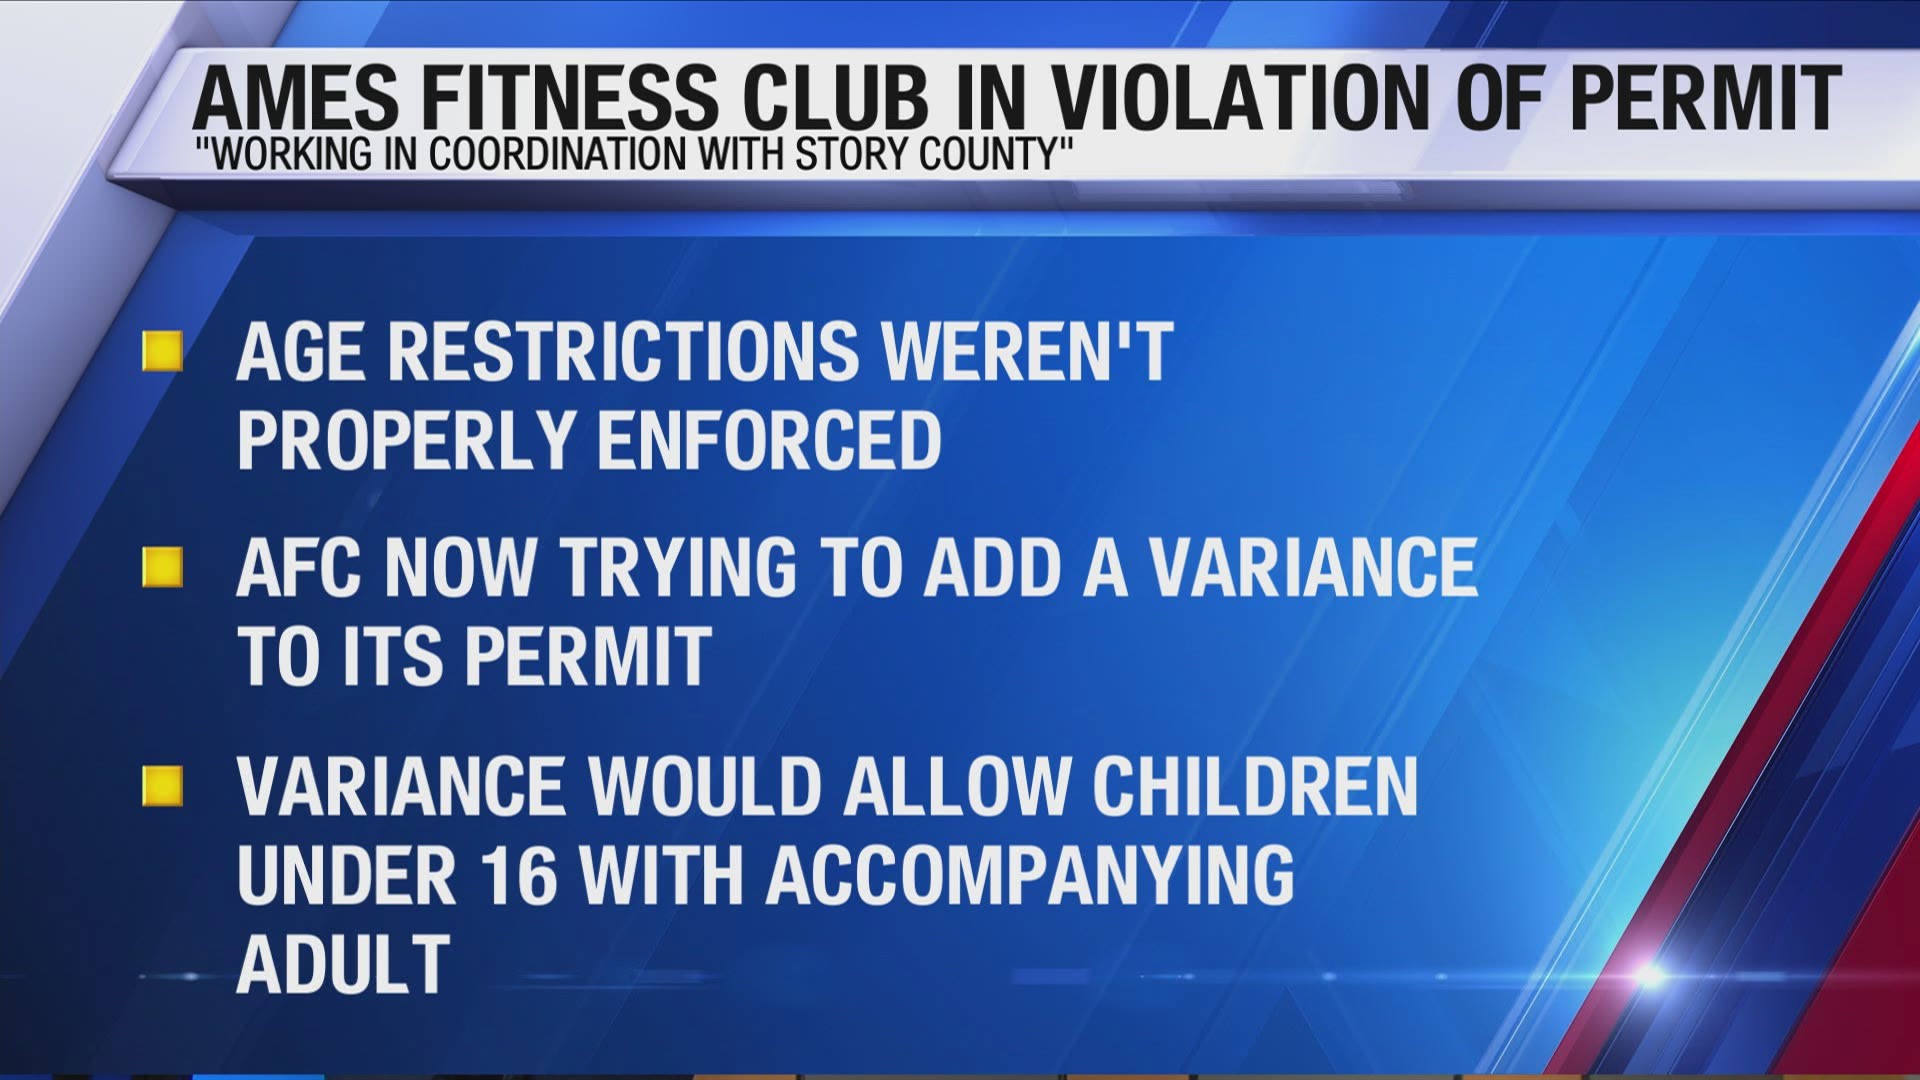 Ames fitness club in violation of state permit, closes to anyone under 16